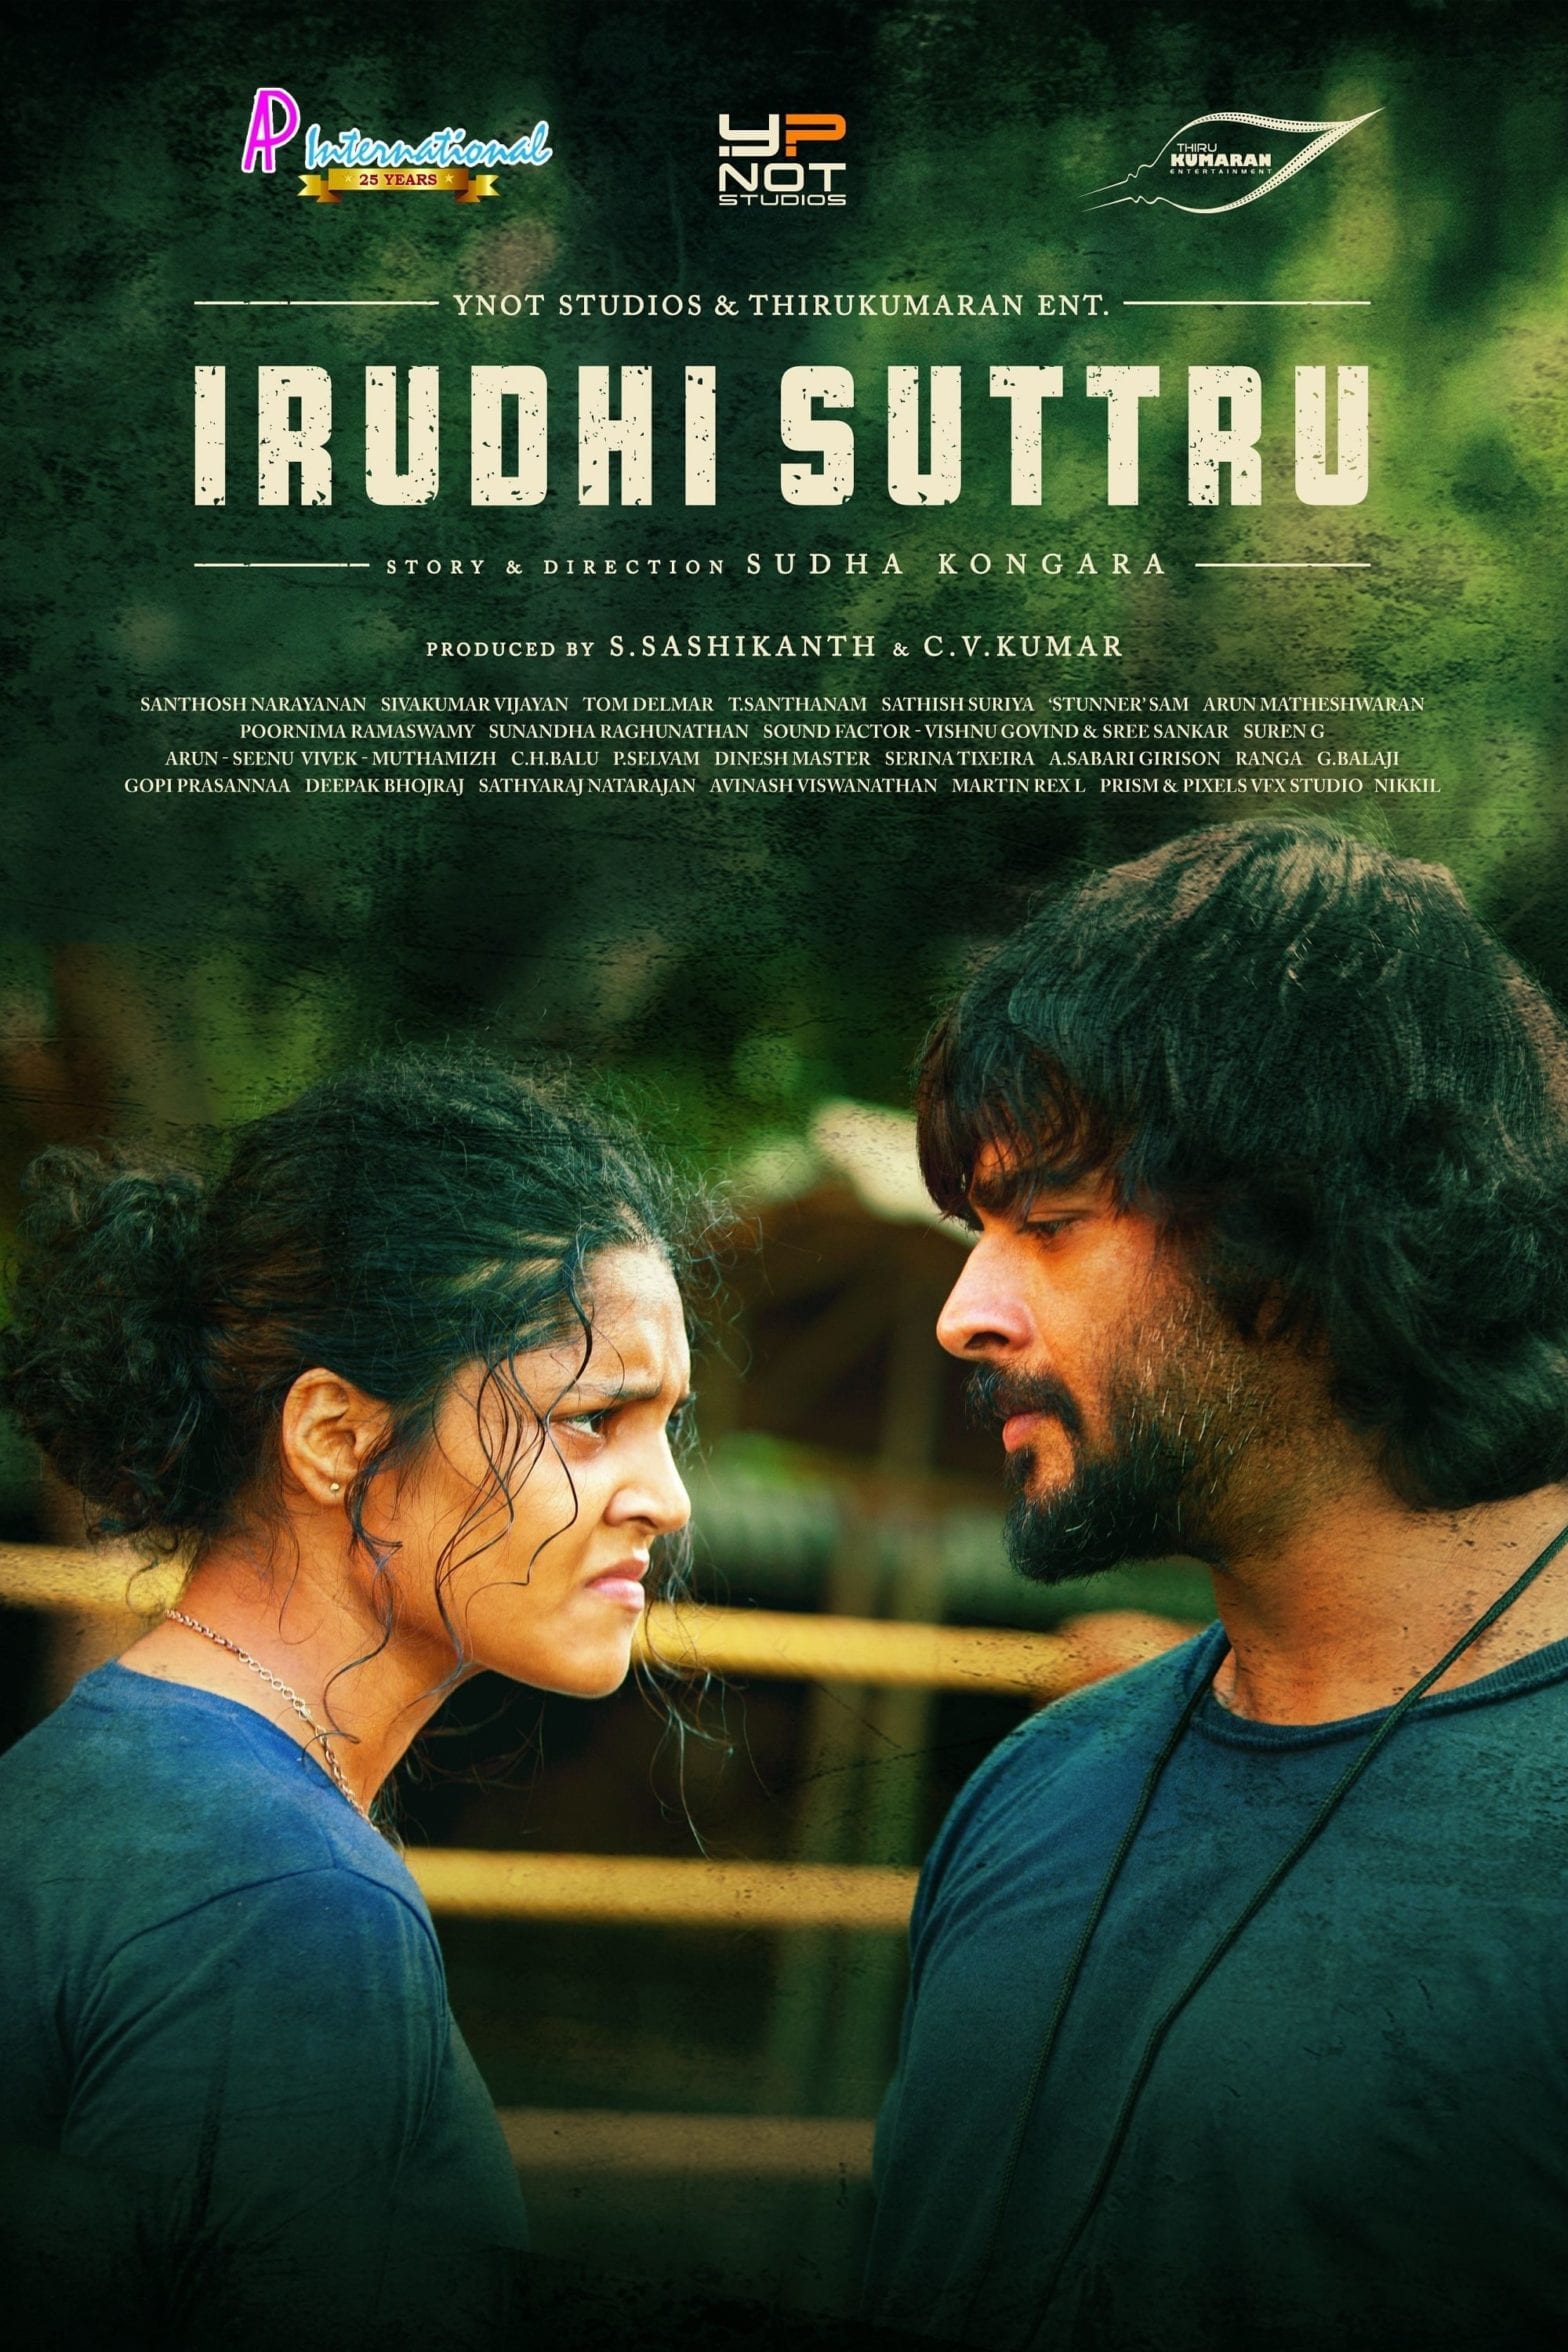 Poster for the movie "Irudhi Suttru"